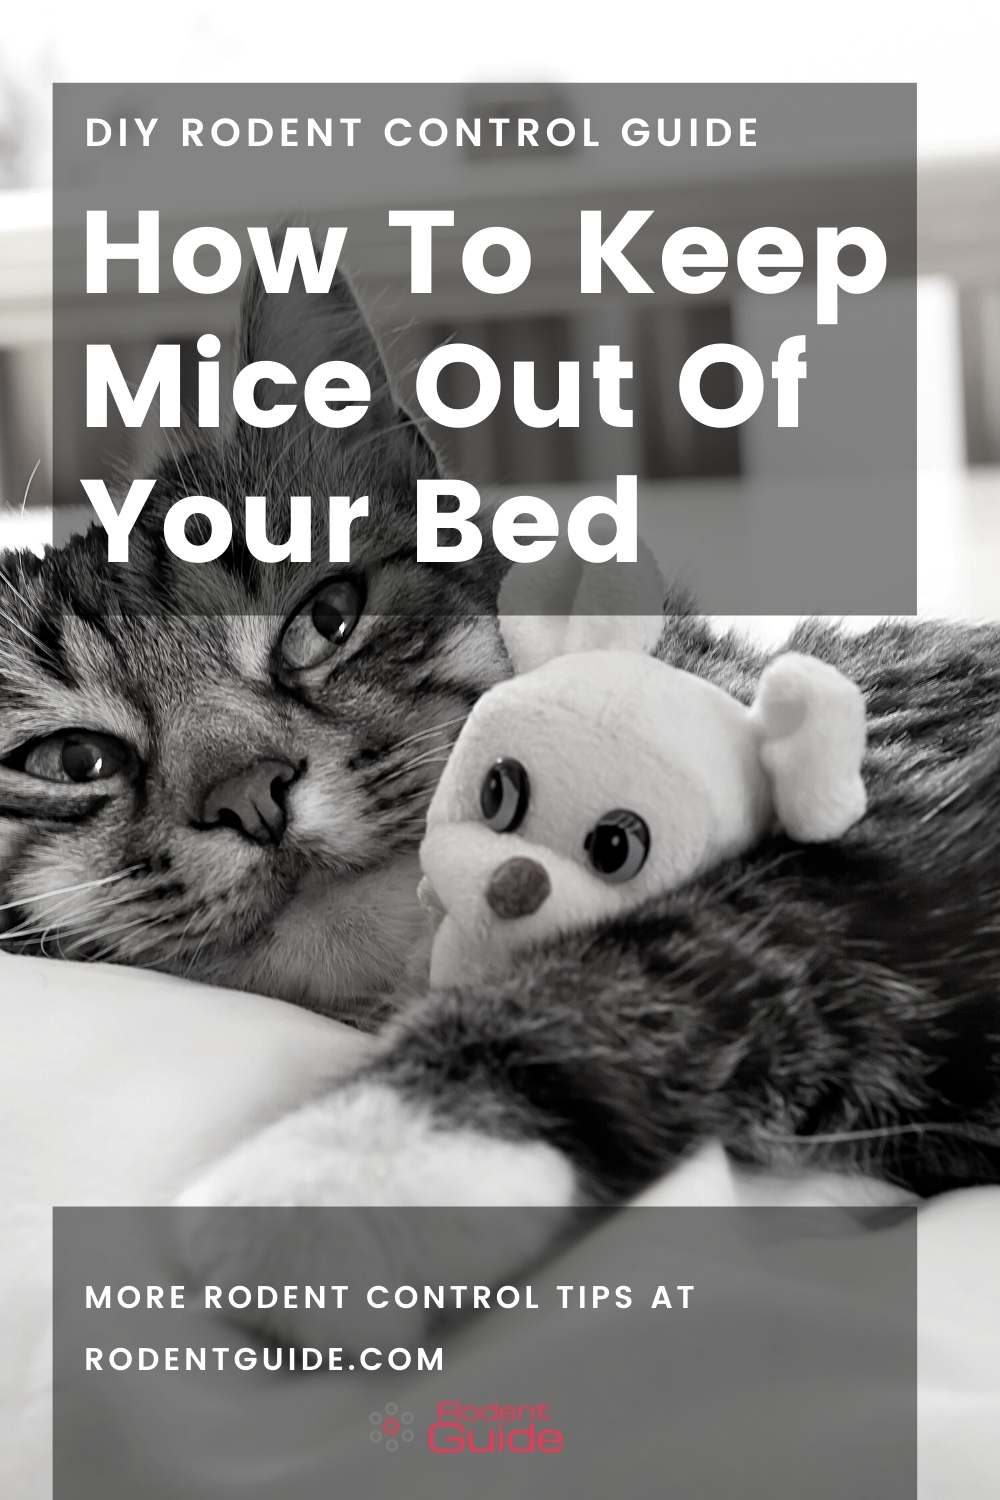 How To Keep Mice Out Of Your Bed (2)